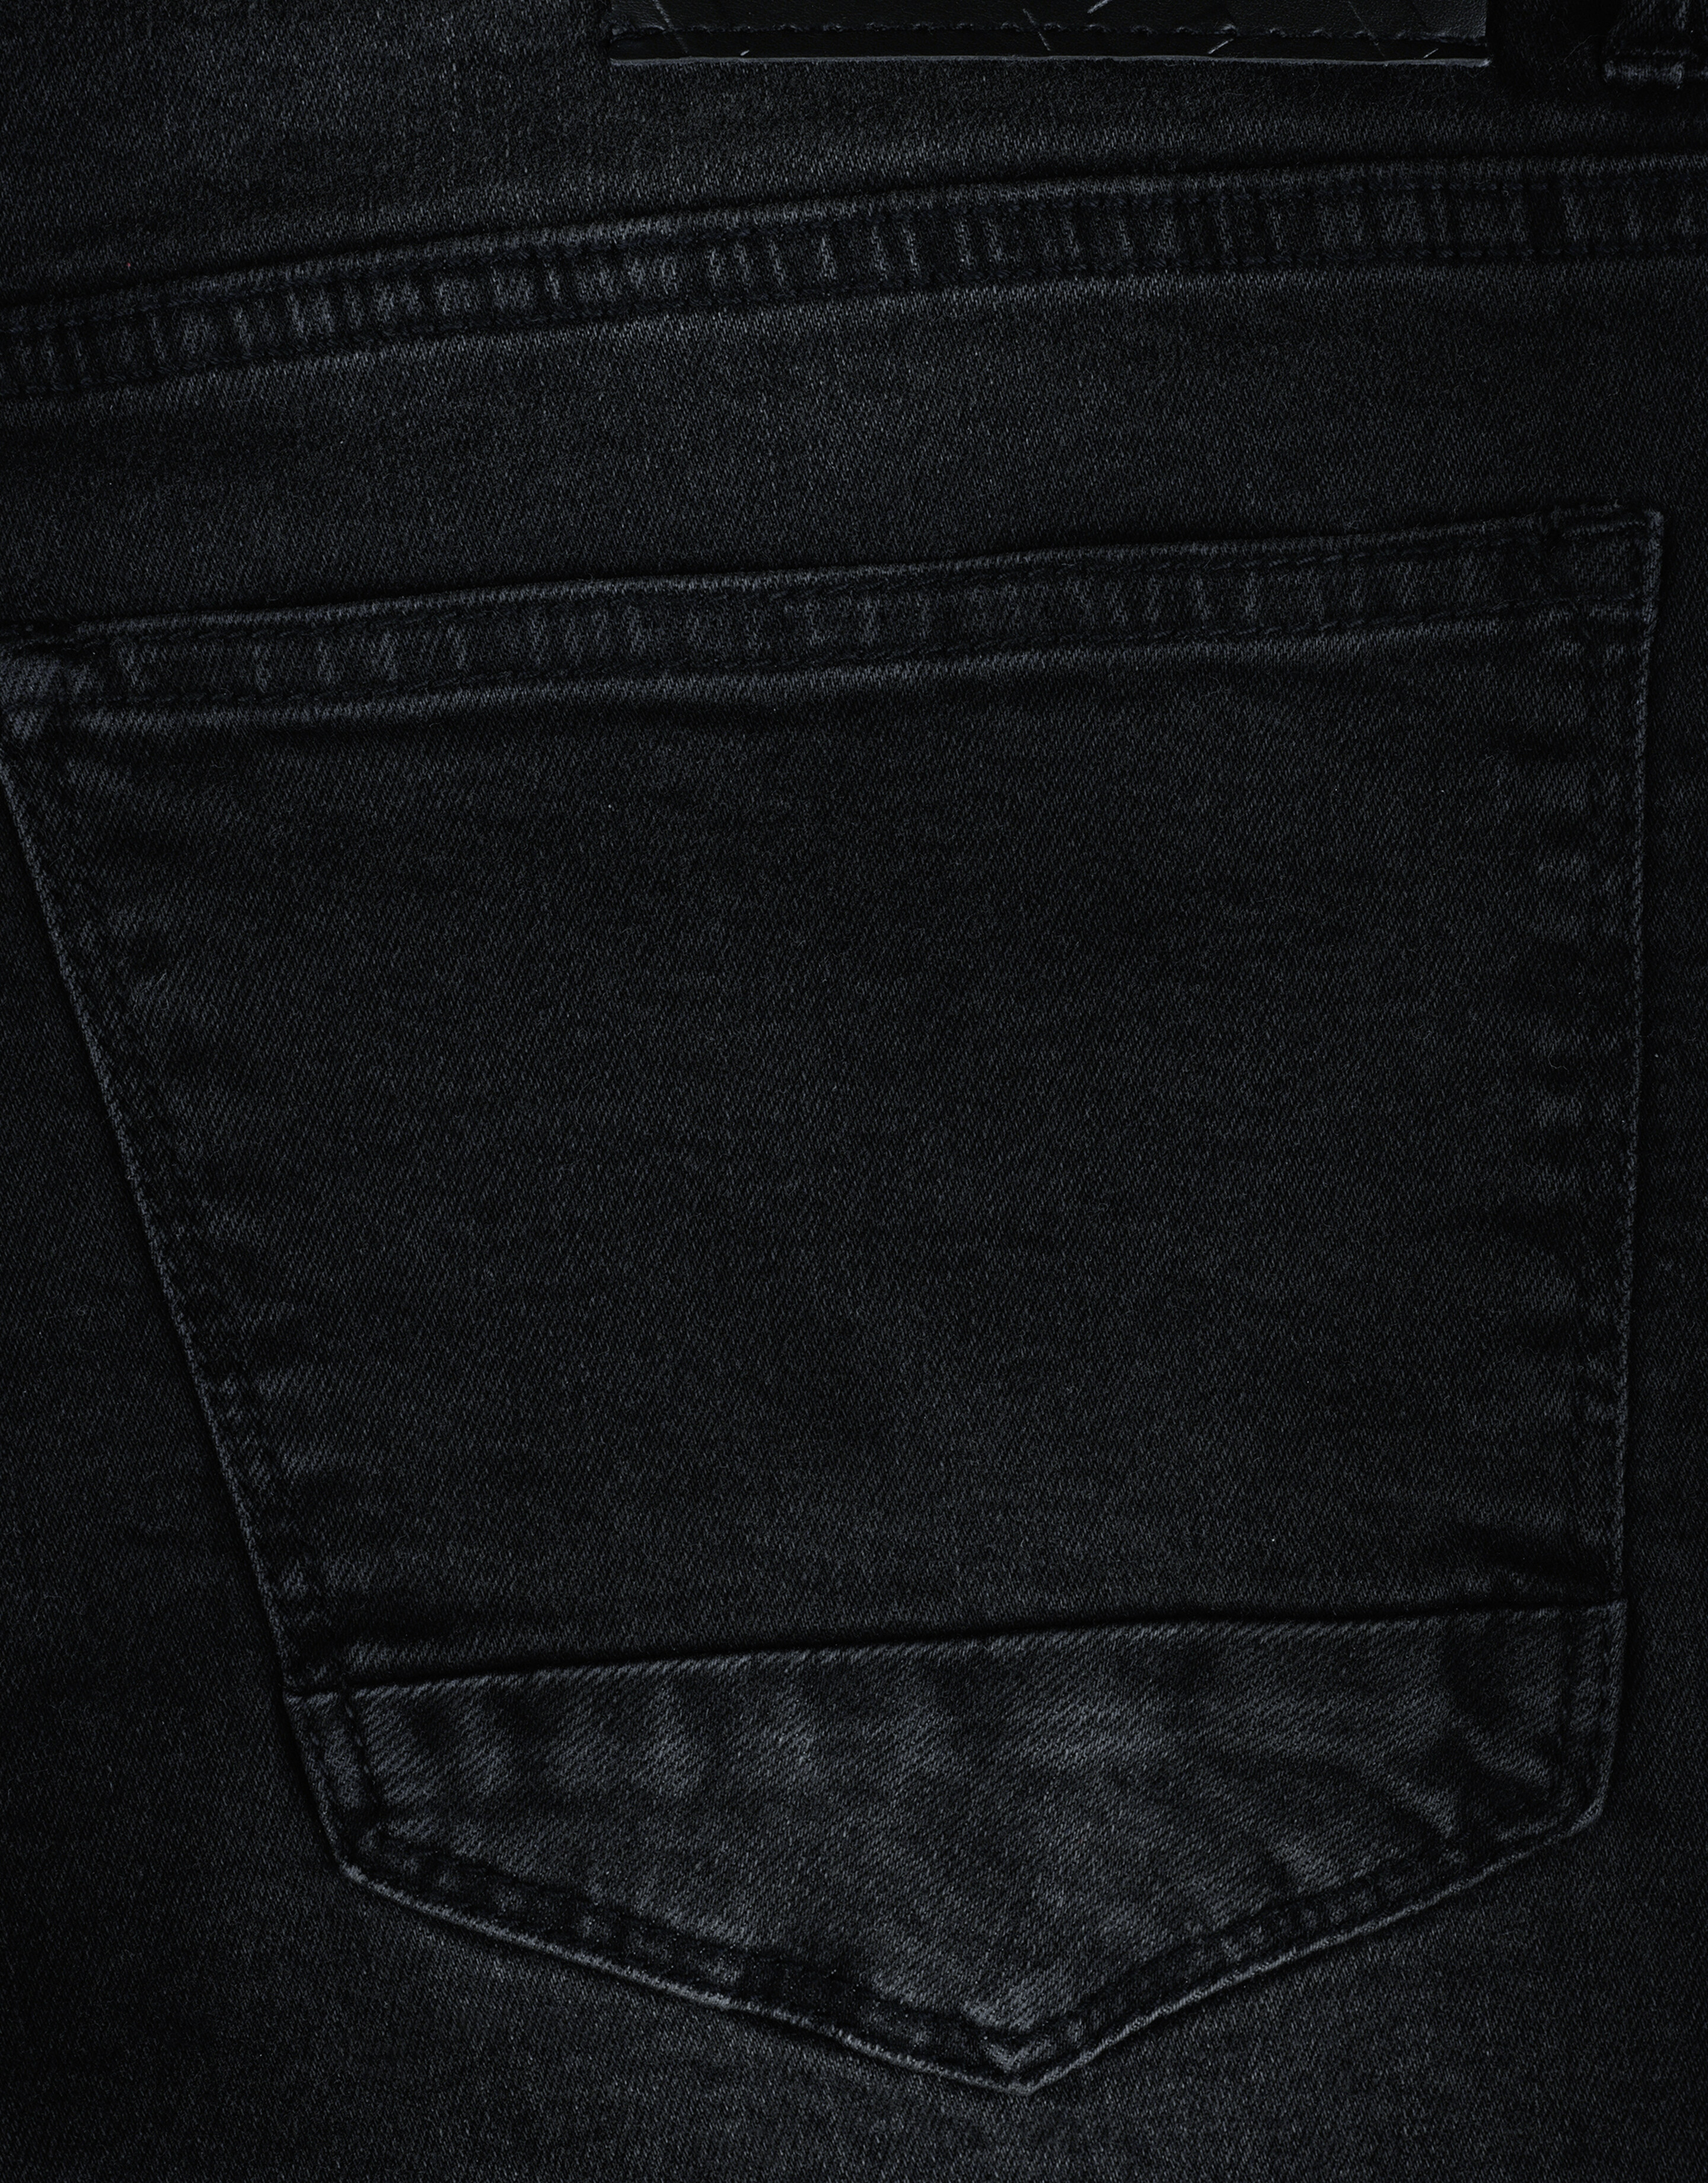 Straigt Jeans Washed Black L34 Refill